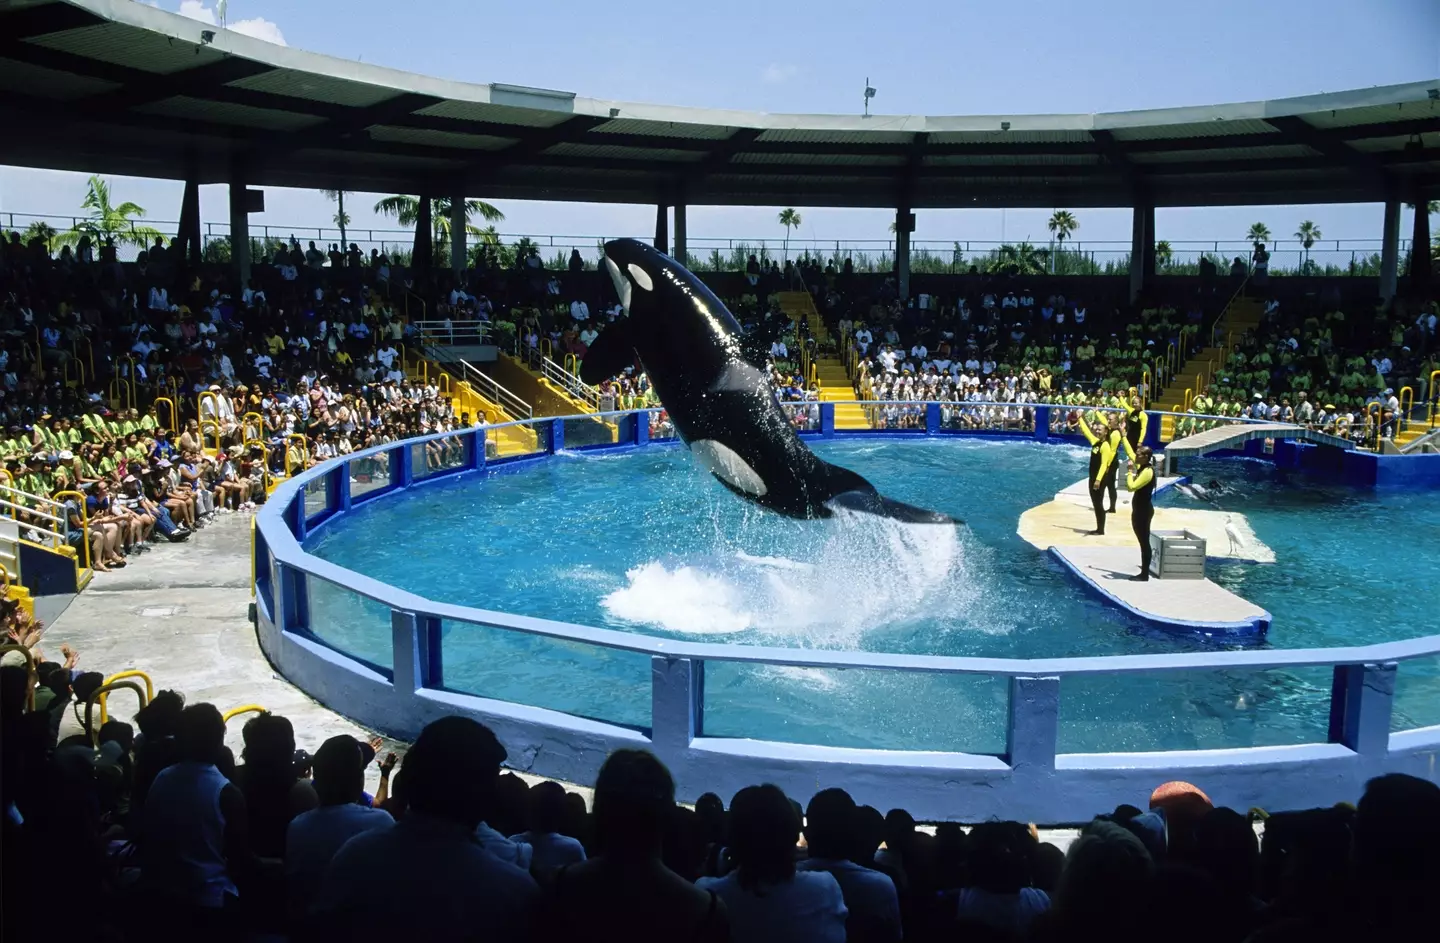 Lolita the orca (pictured) was captured all the way back in 1970.